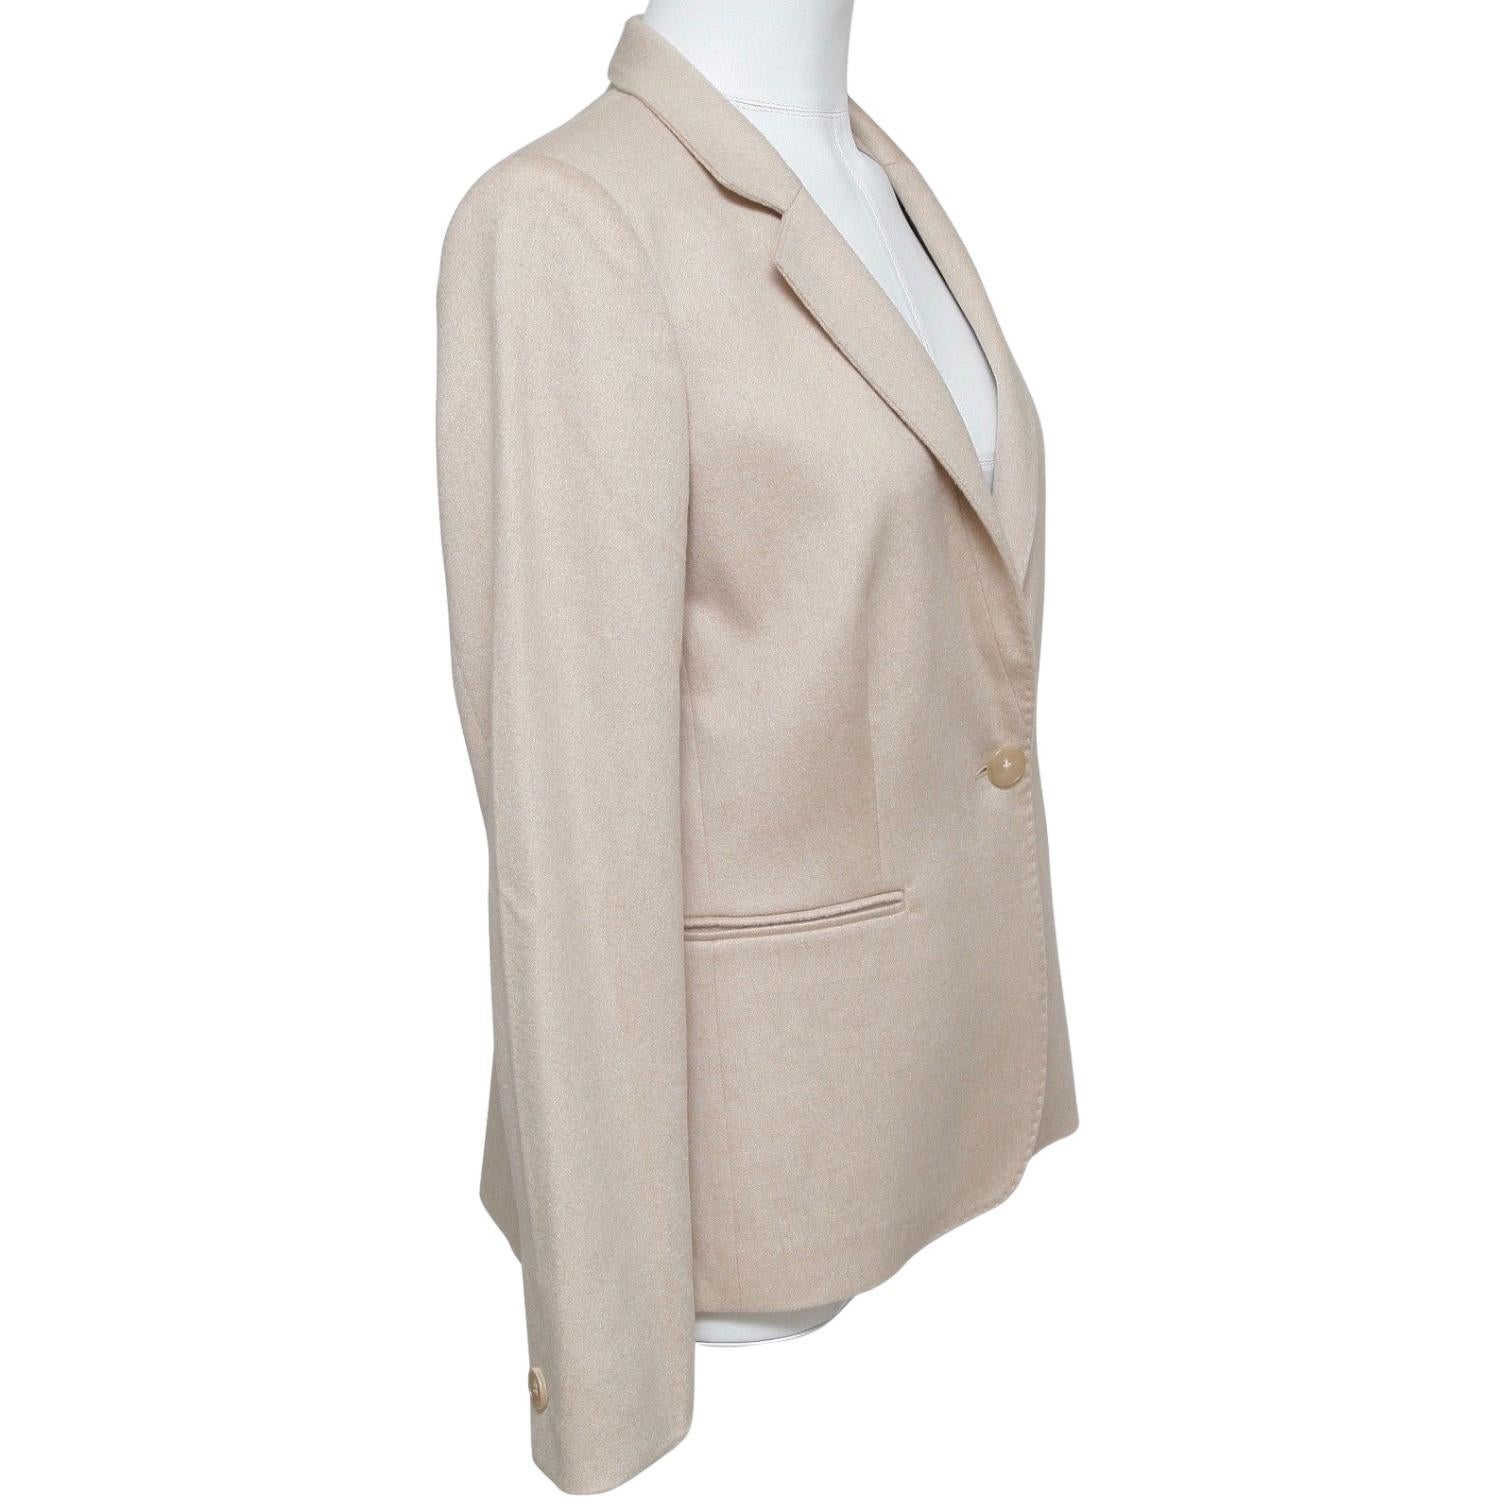 
GUARANTEED AUTHENTIC MAX MARA CAMEL HAIR BLAZER


Design:
  - Classic camel hair blazer in a rich beige color.
  - Looks great paired with jeans or dressed, very comfortable.
  - Notched lapel, front  center button closure.
  - Dual slit pockets,